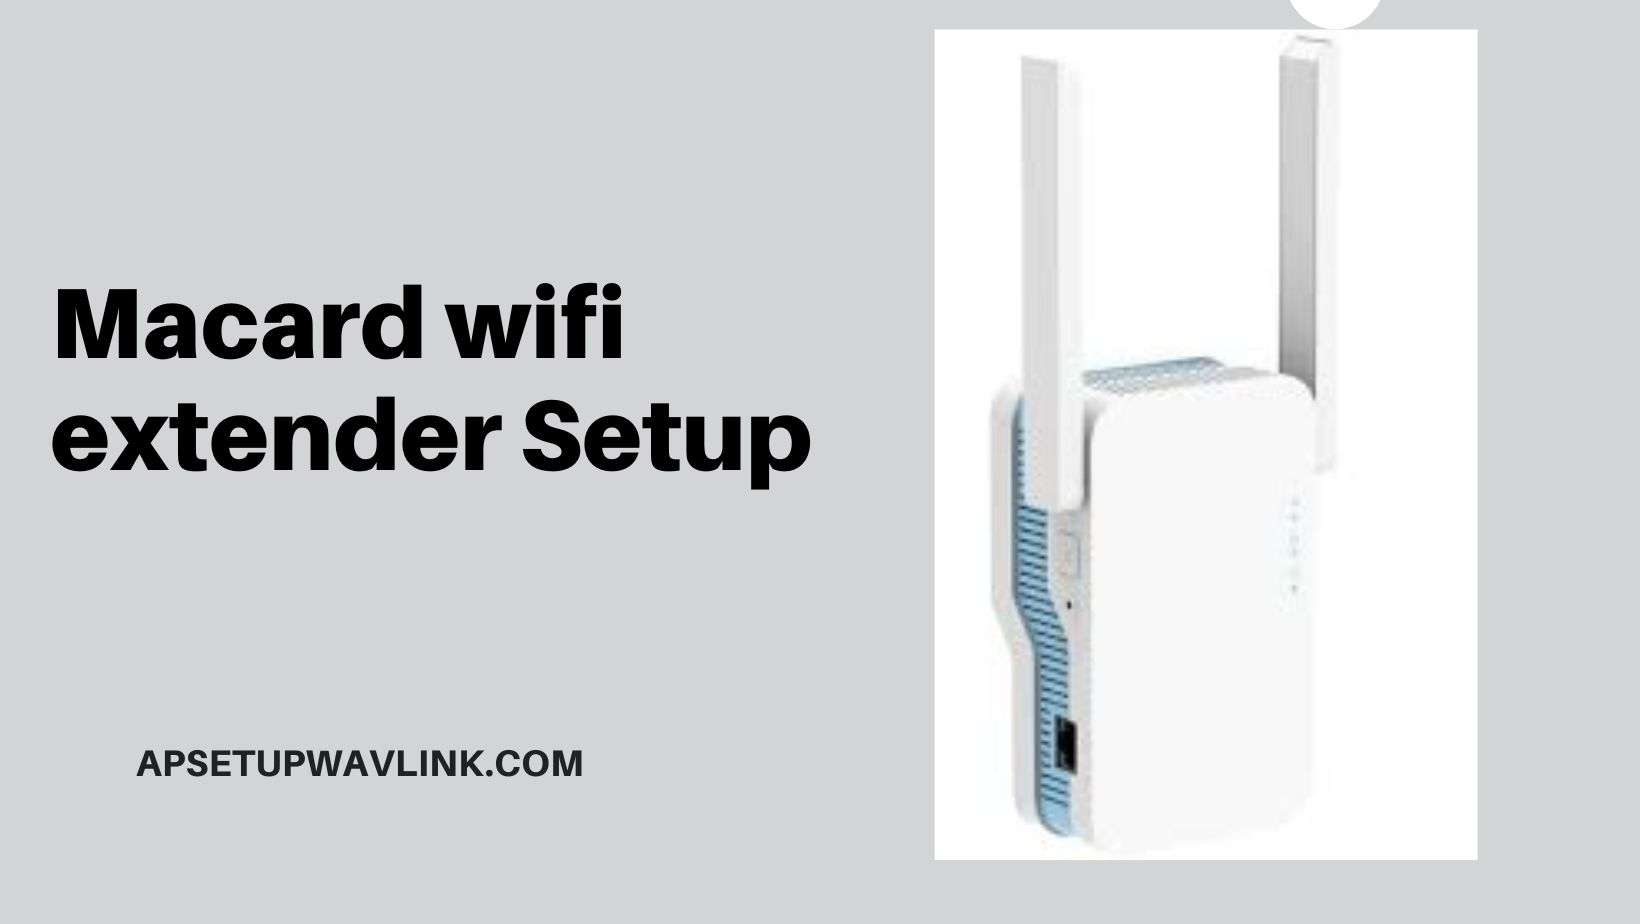 You are currently viewing Macard wifi extender Setup